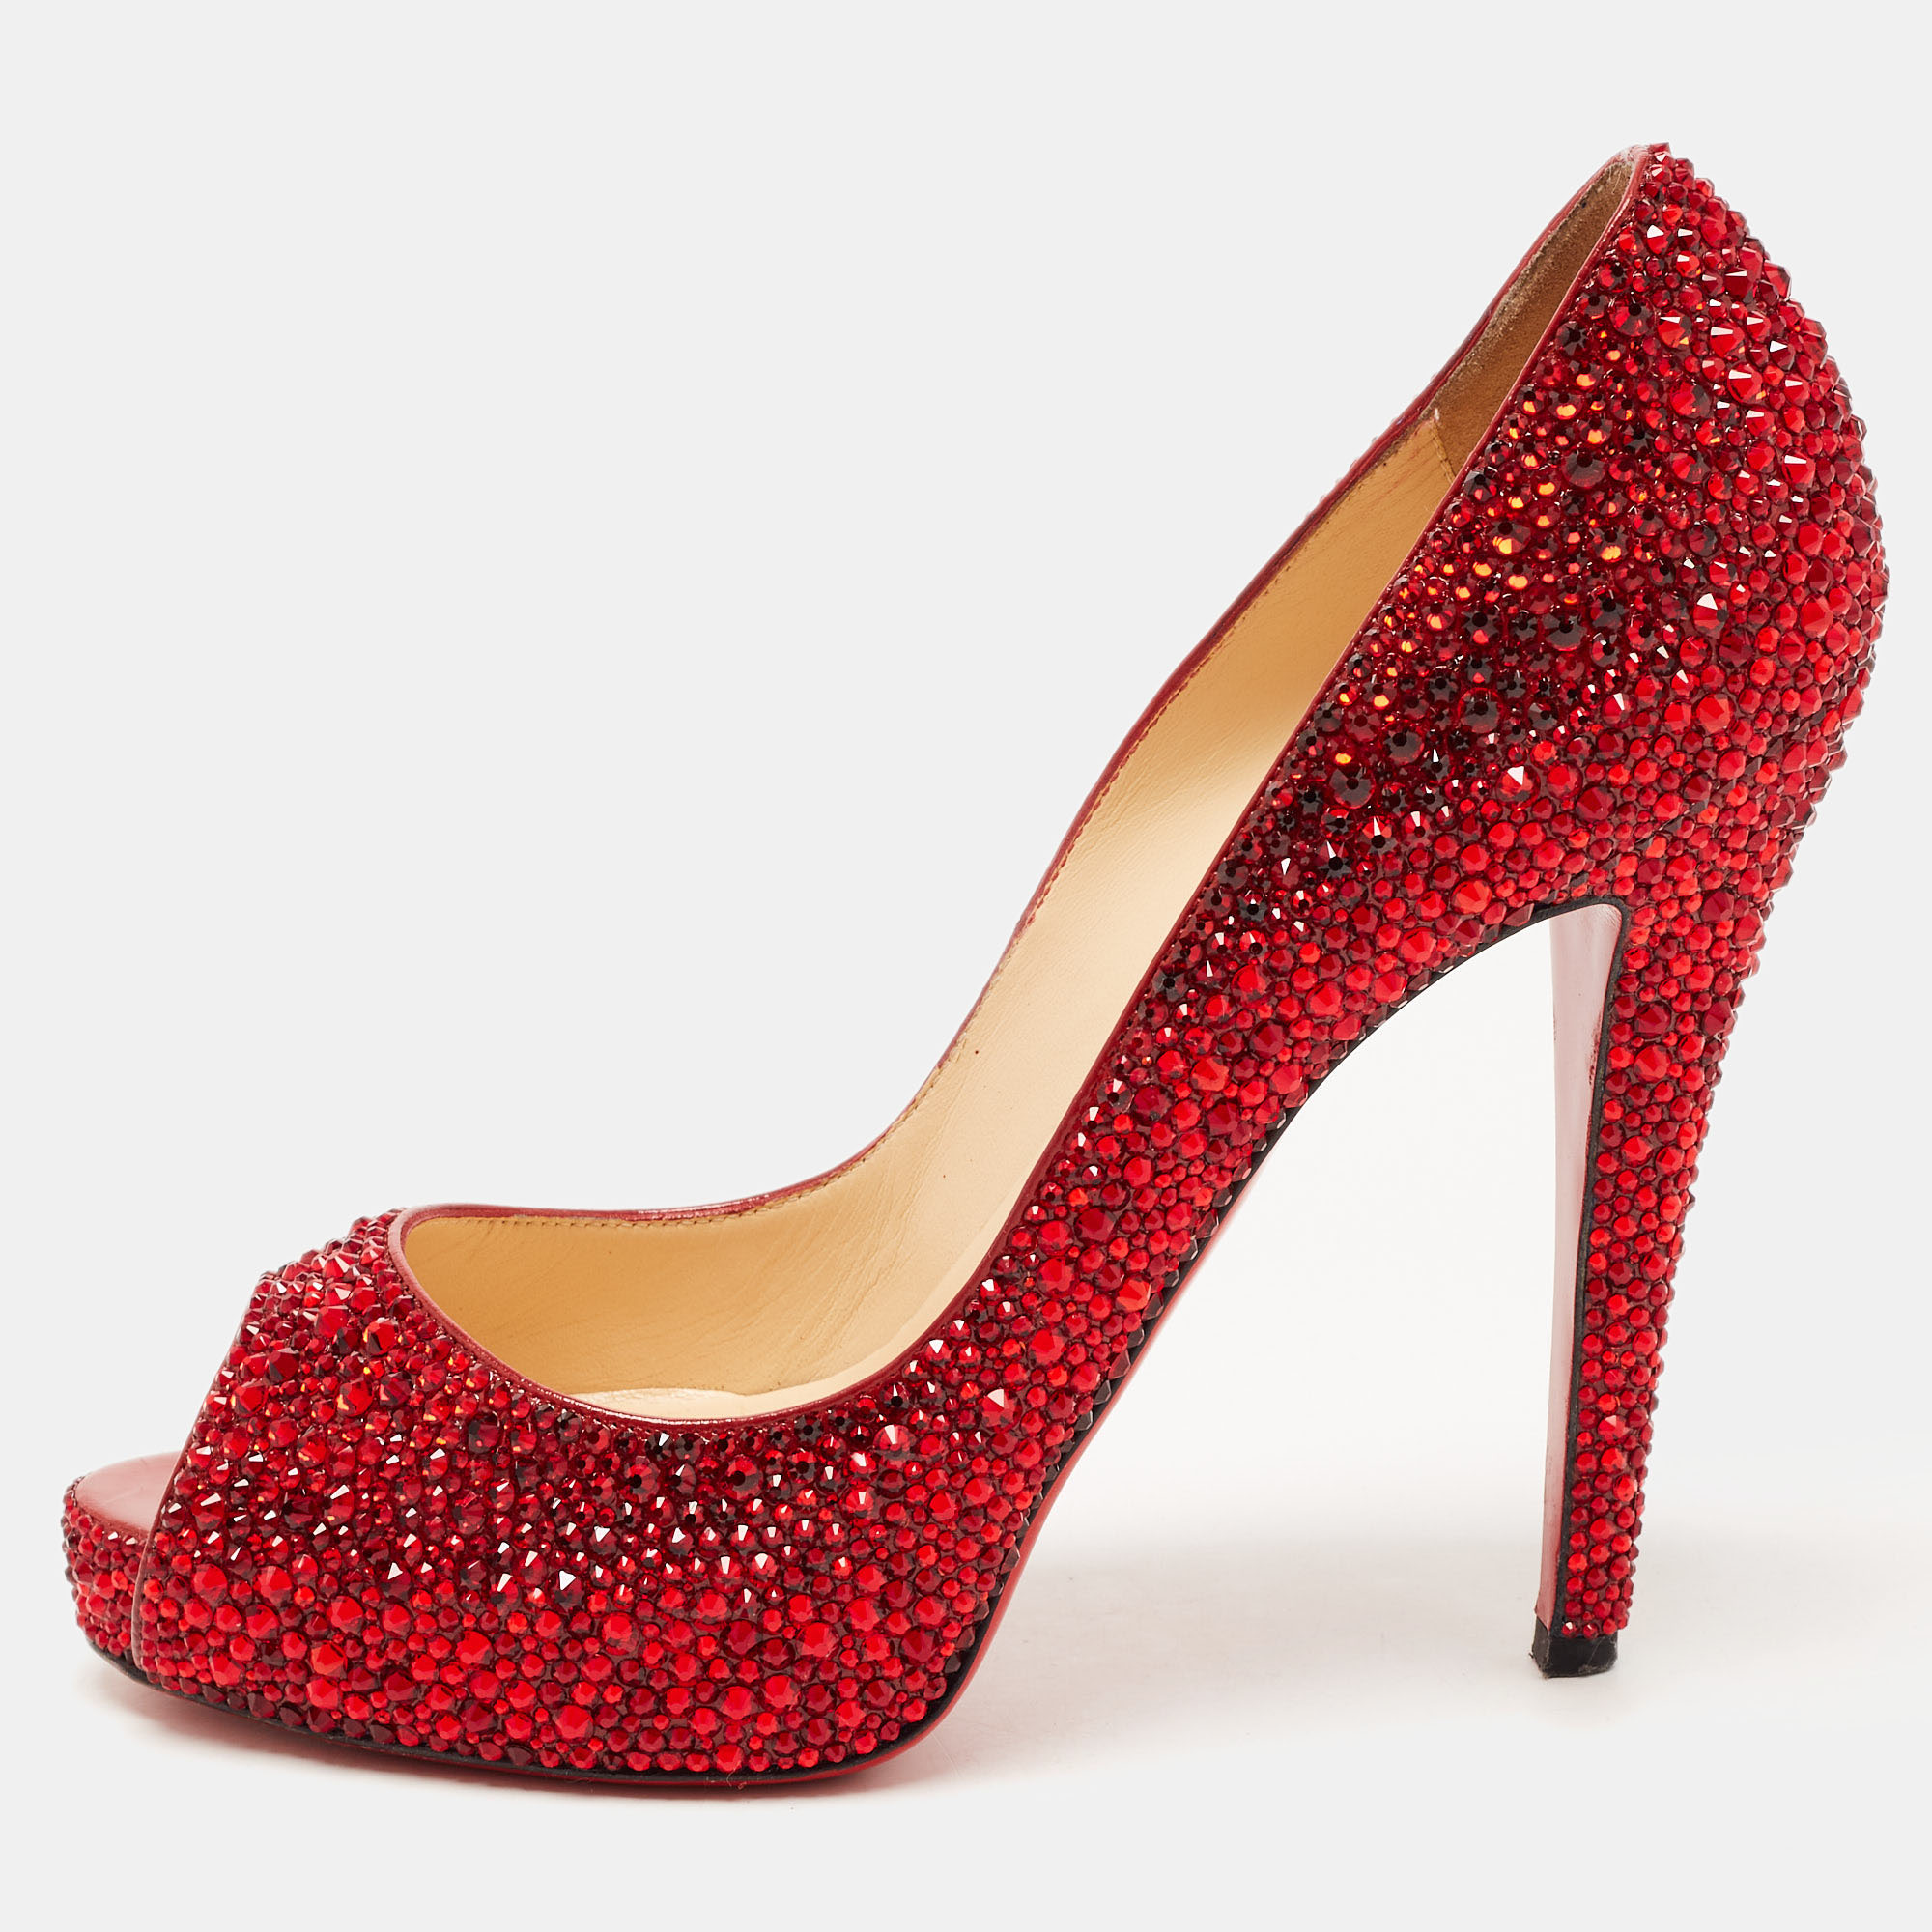 Pre-owned Christian Louboutin Red Leather Strass Very Prive Pumps Size 37.5